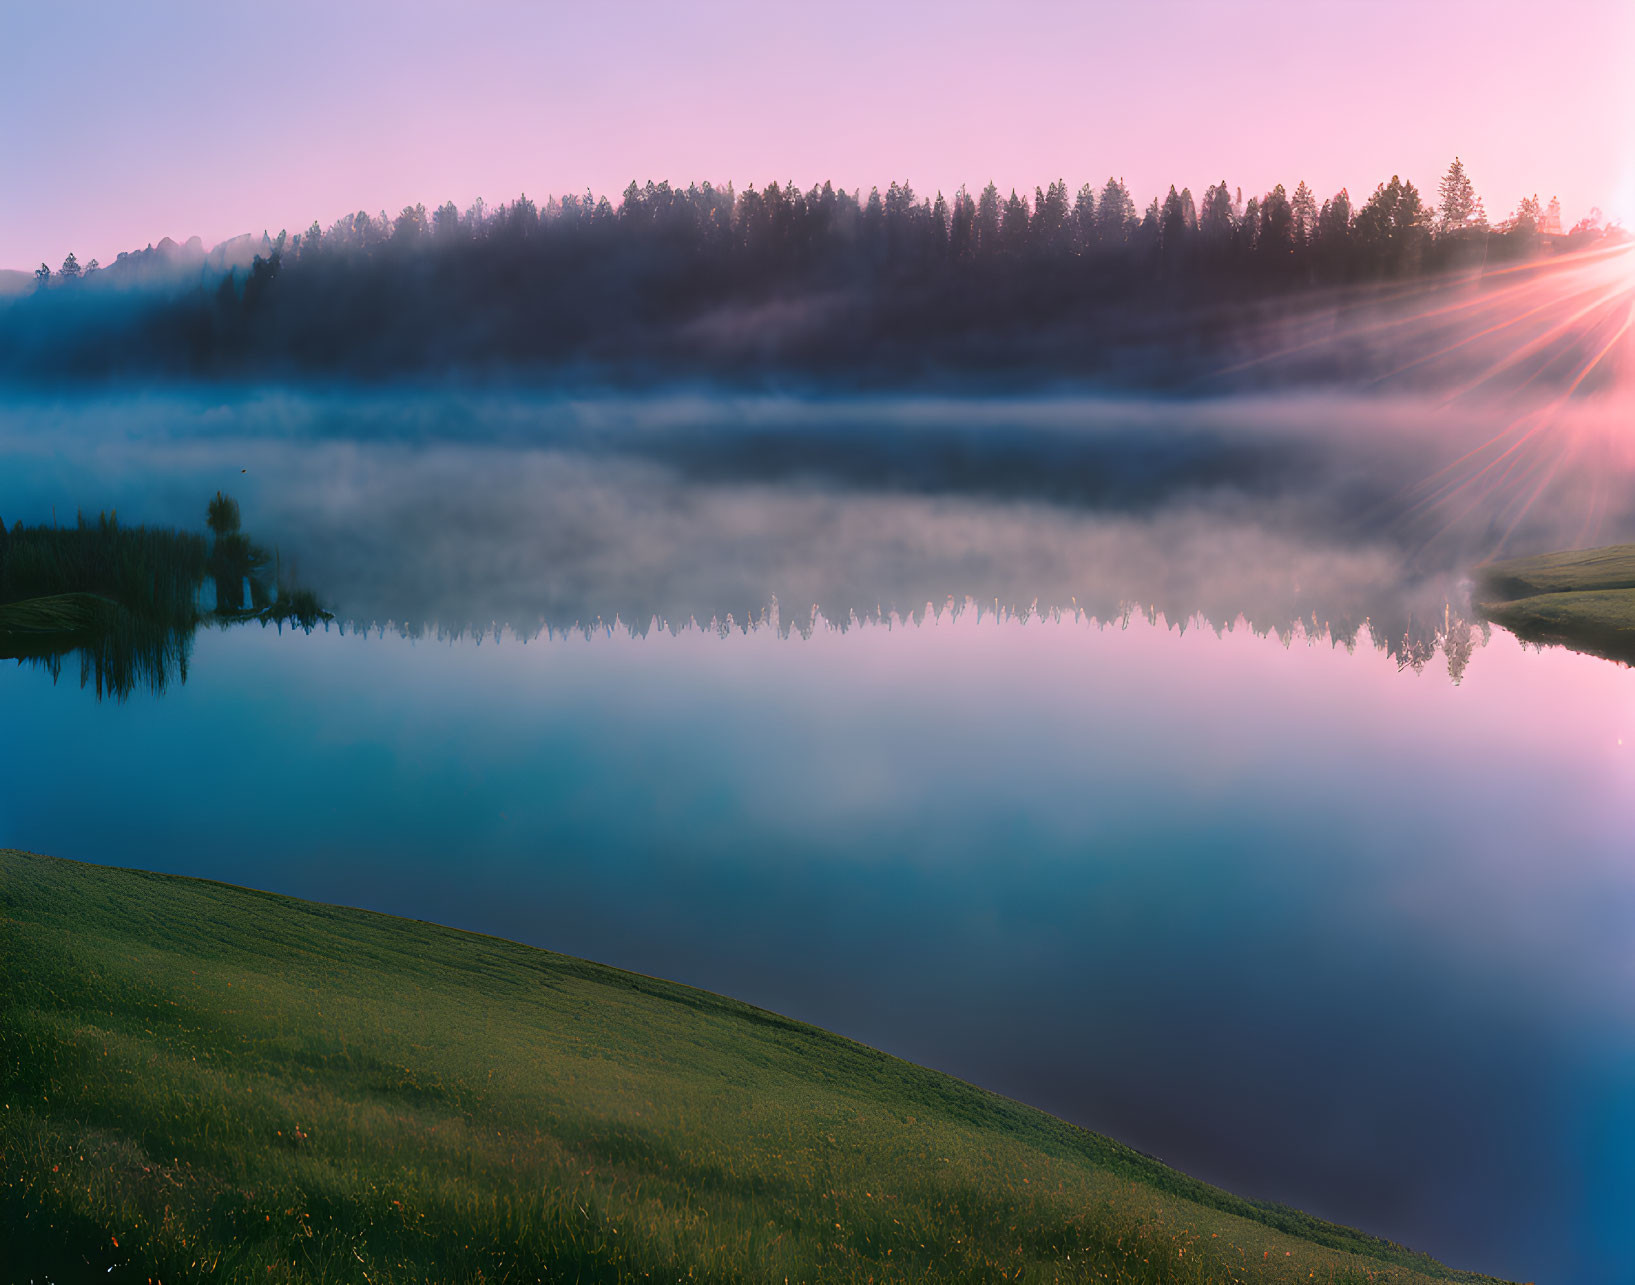 Tranquil sunrise scene over misty lake with tree reflections.